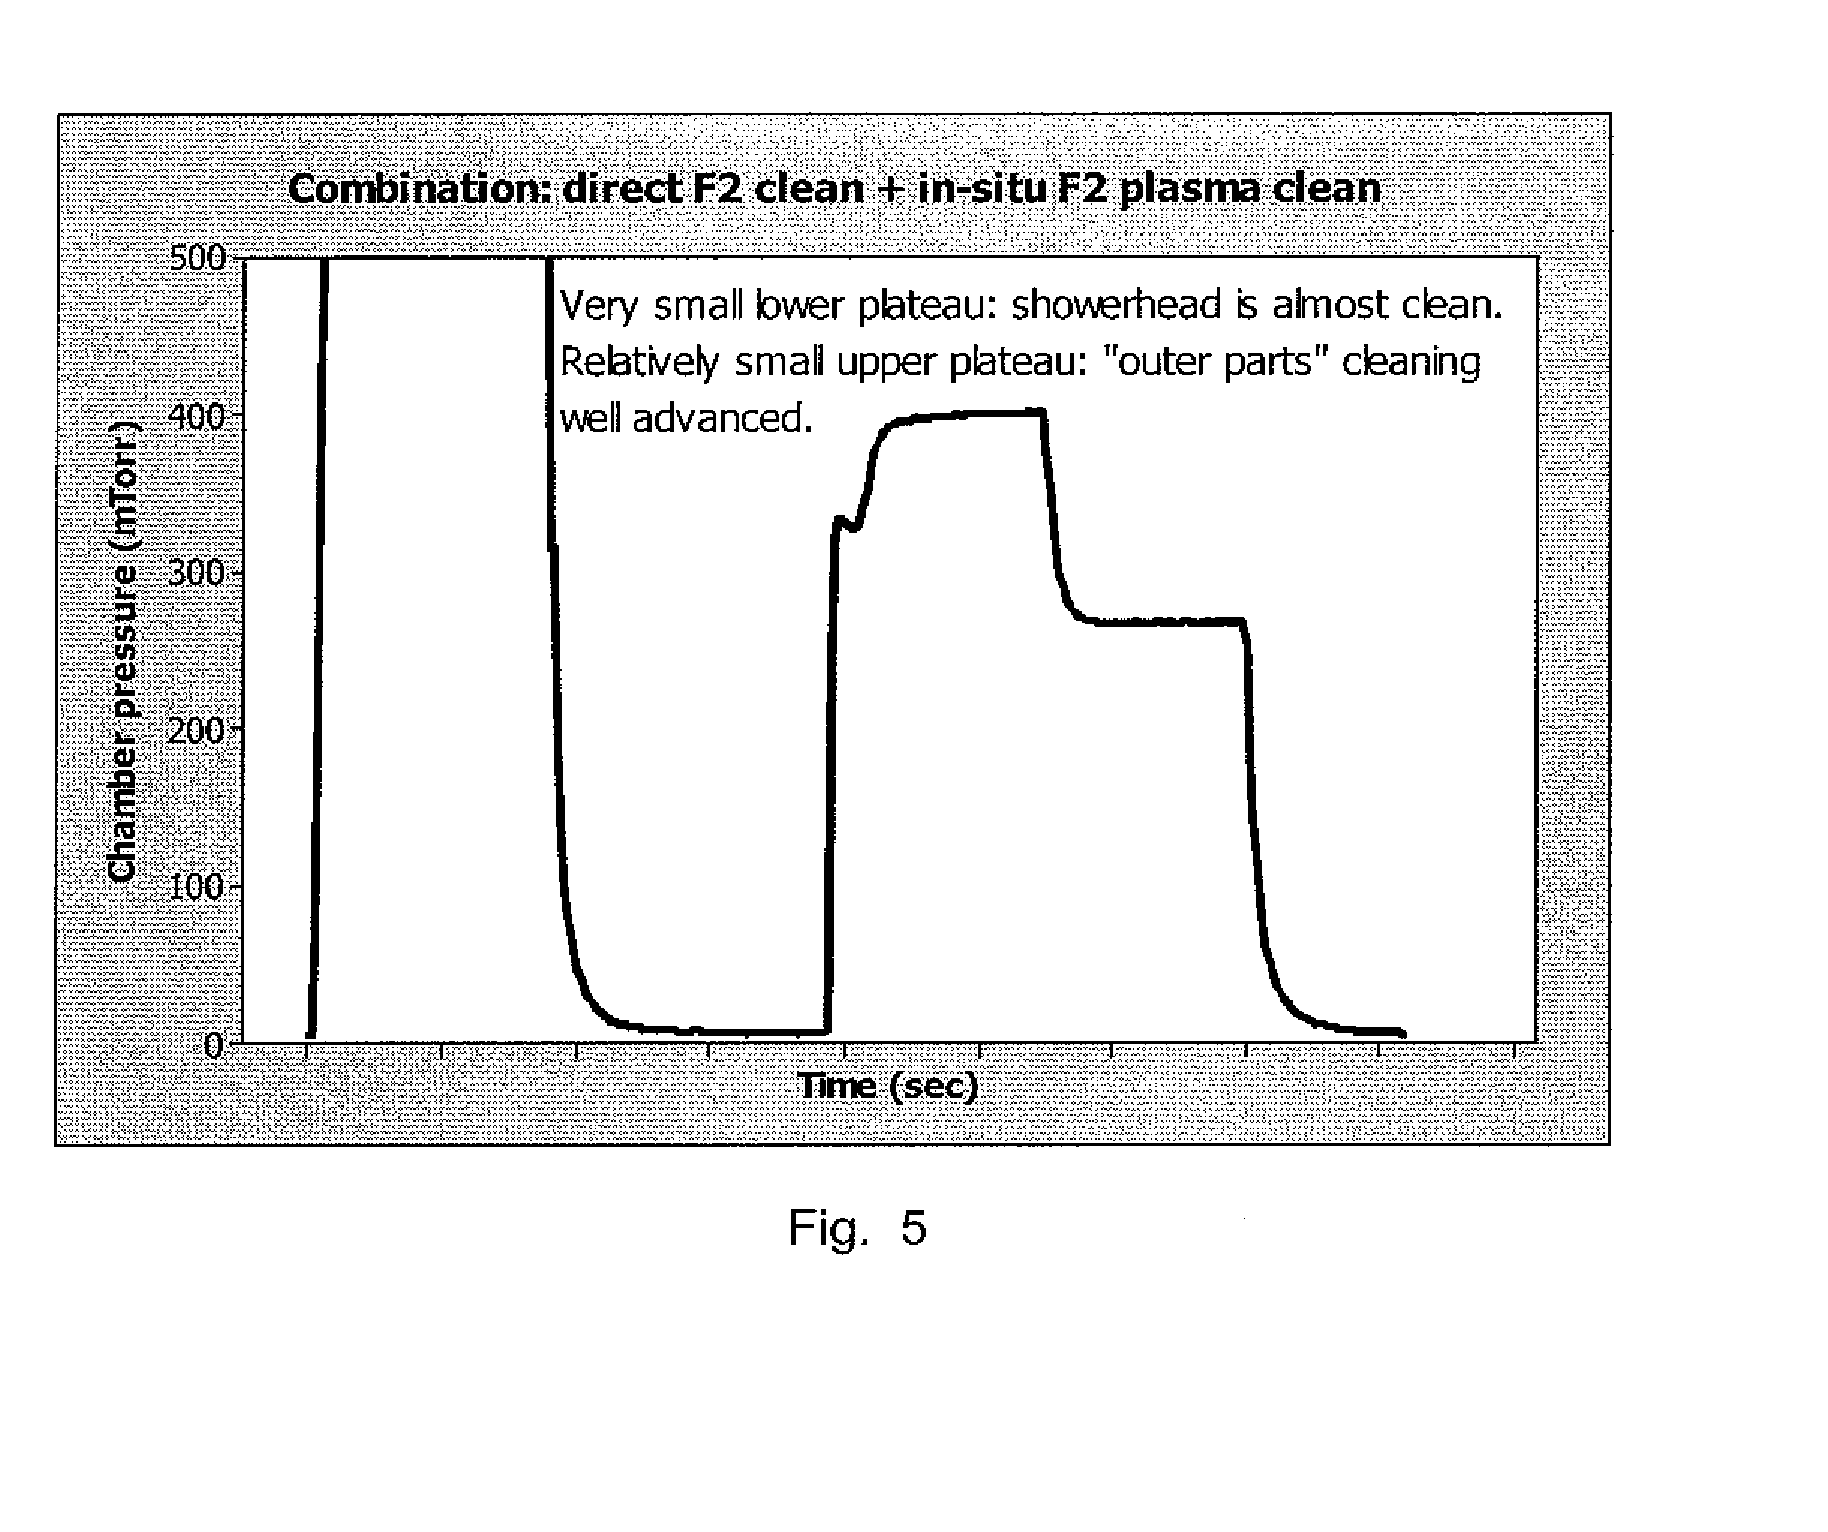 Chemical vapor deposition chamber cleaning with molecular fluorine